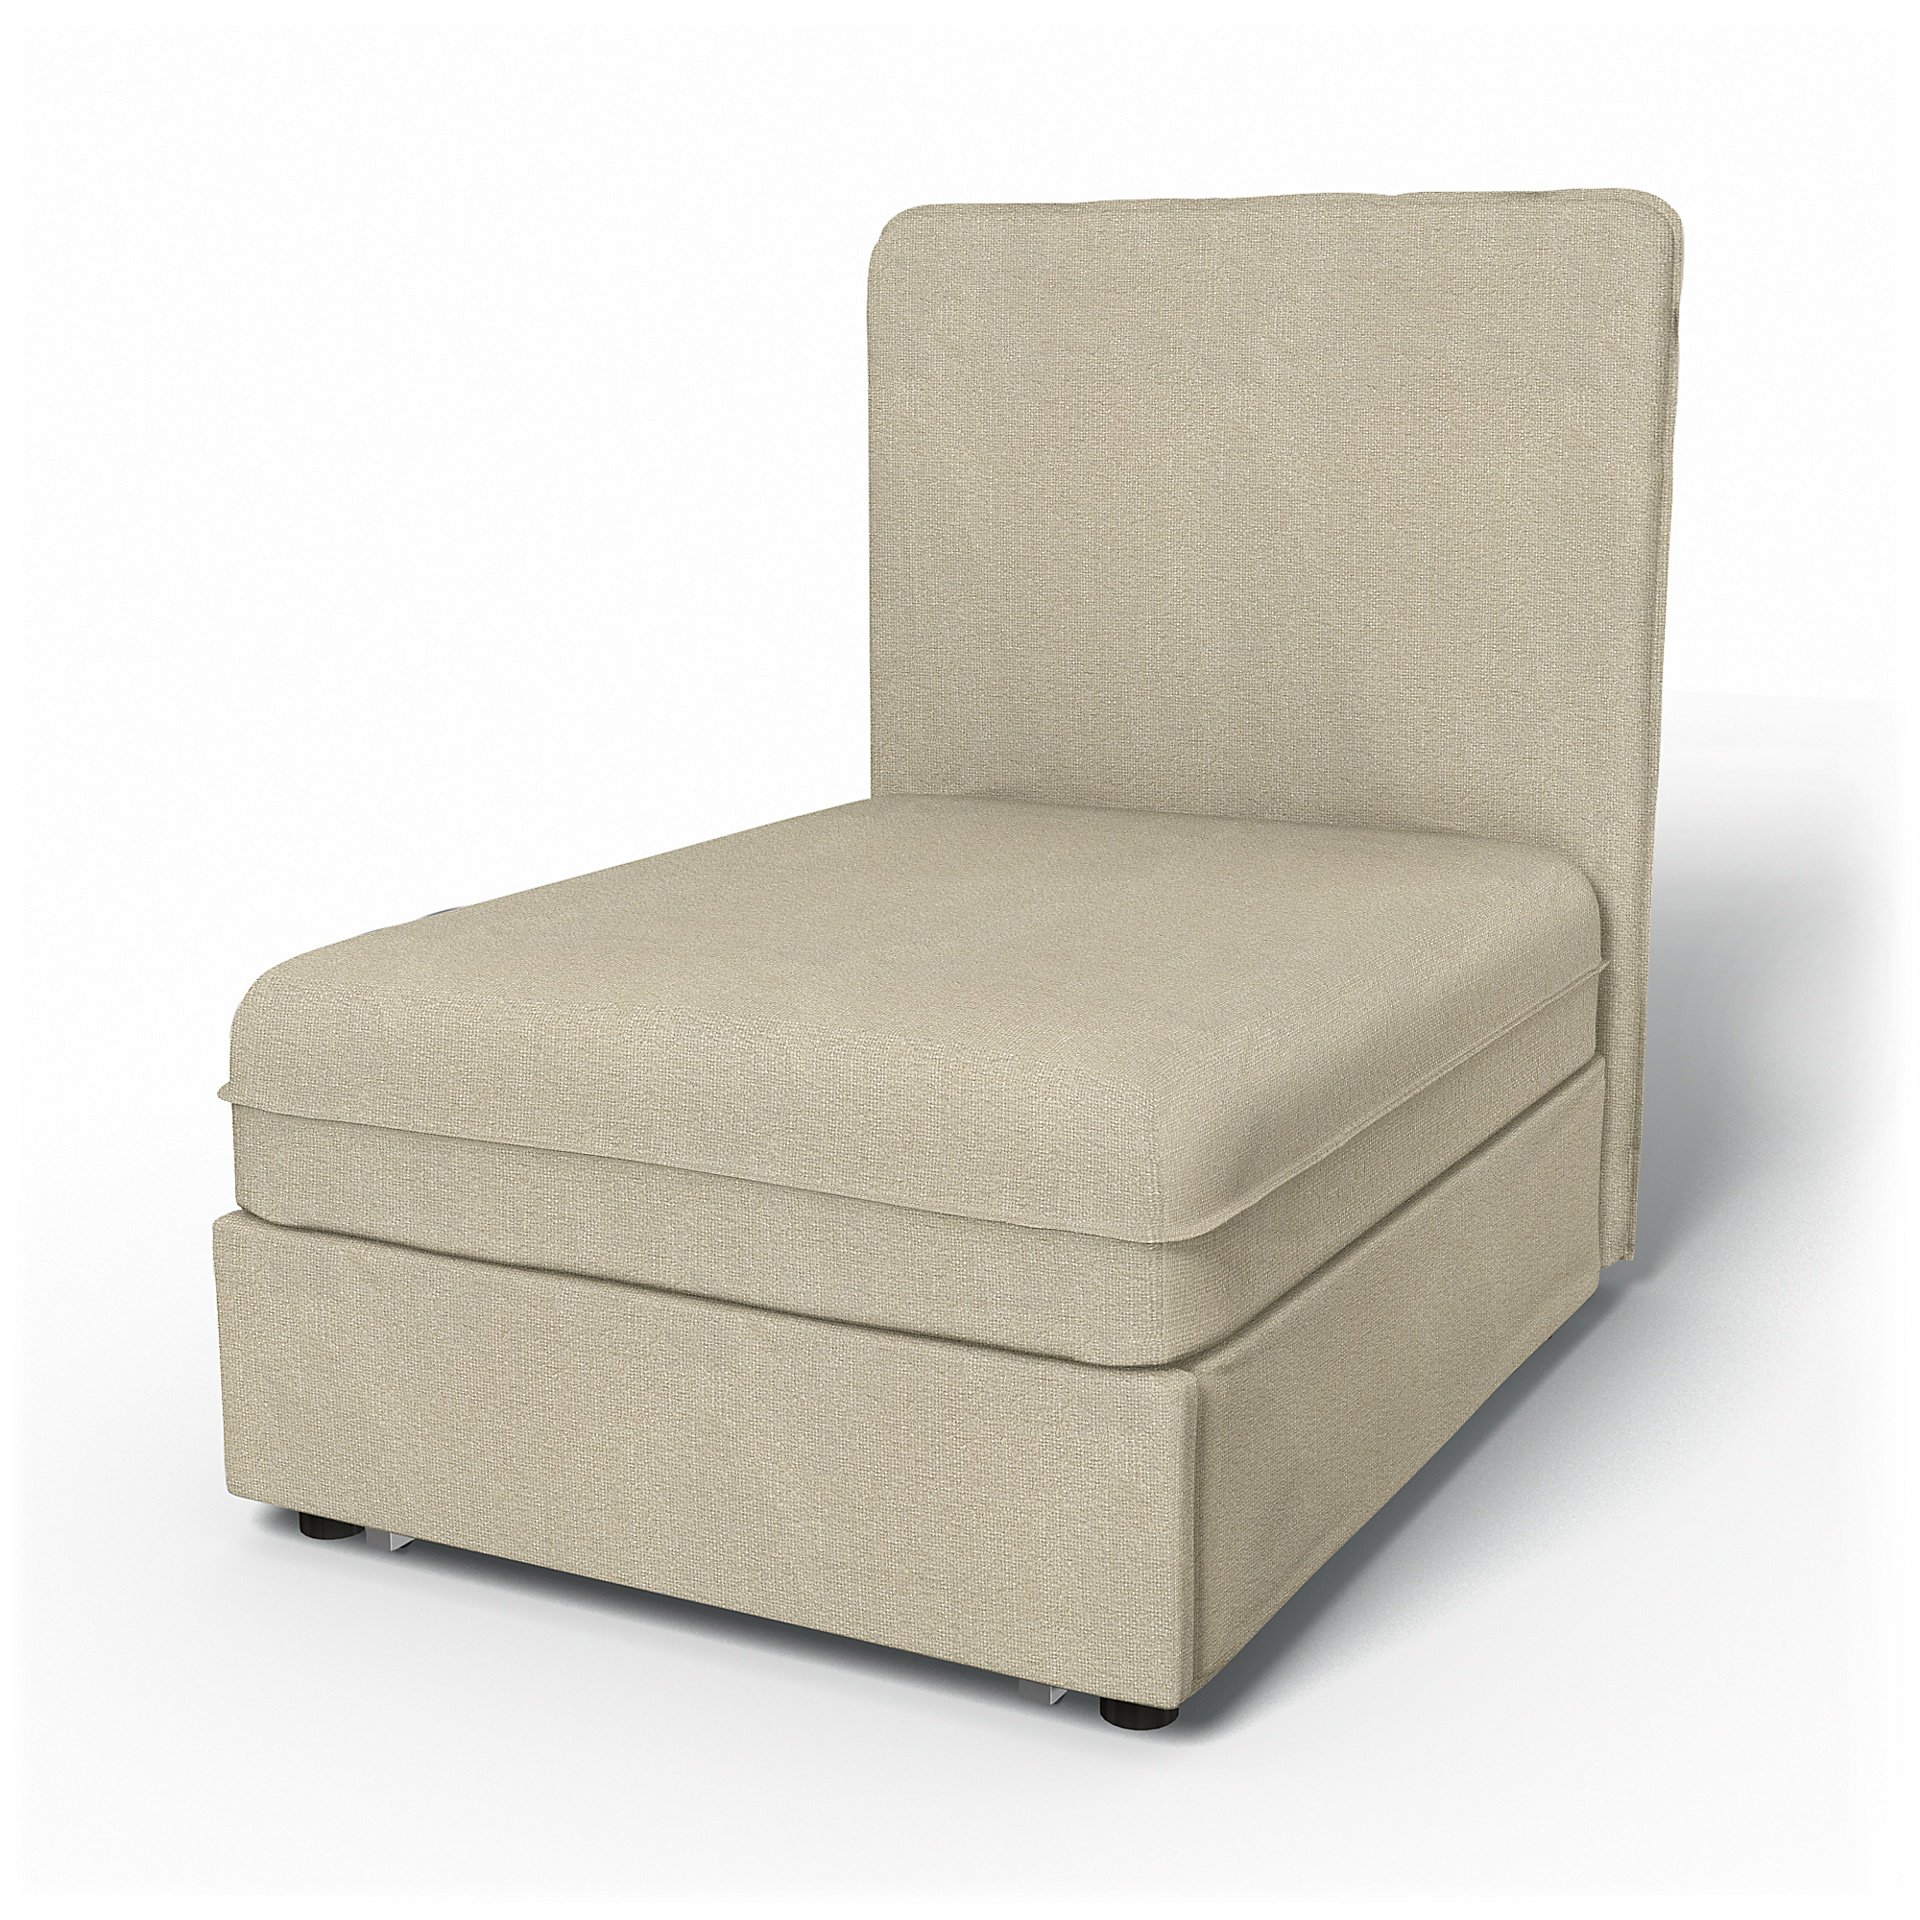 IKEA - Vallentuna Seat Module with High Back Sofa Bed Cover (80x100x46cm), Cream, Boucle & Texture -